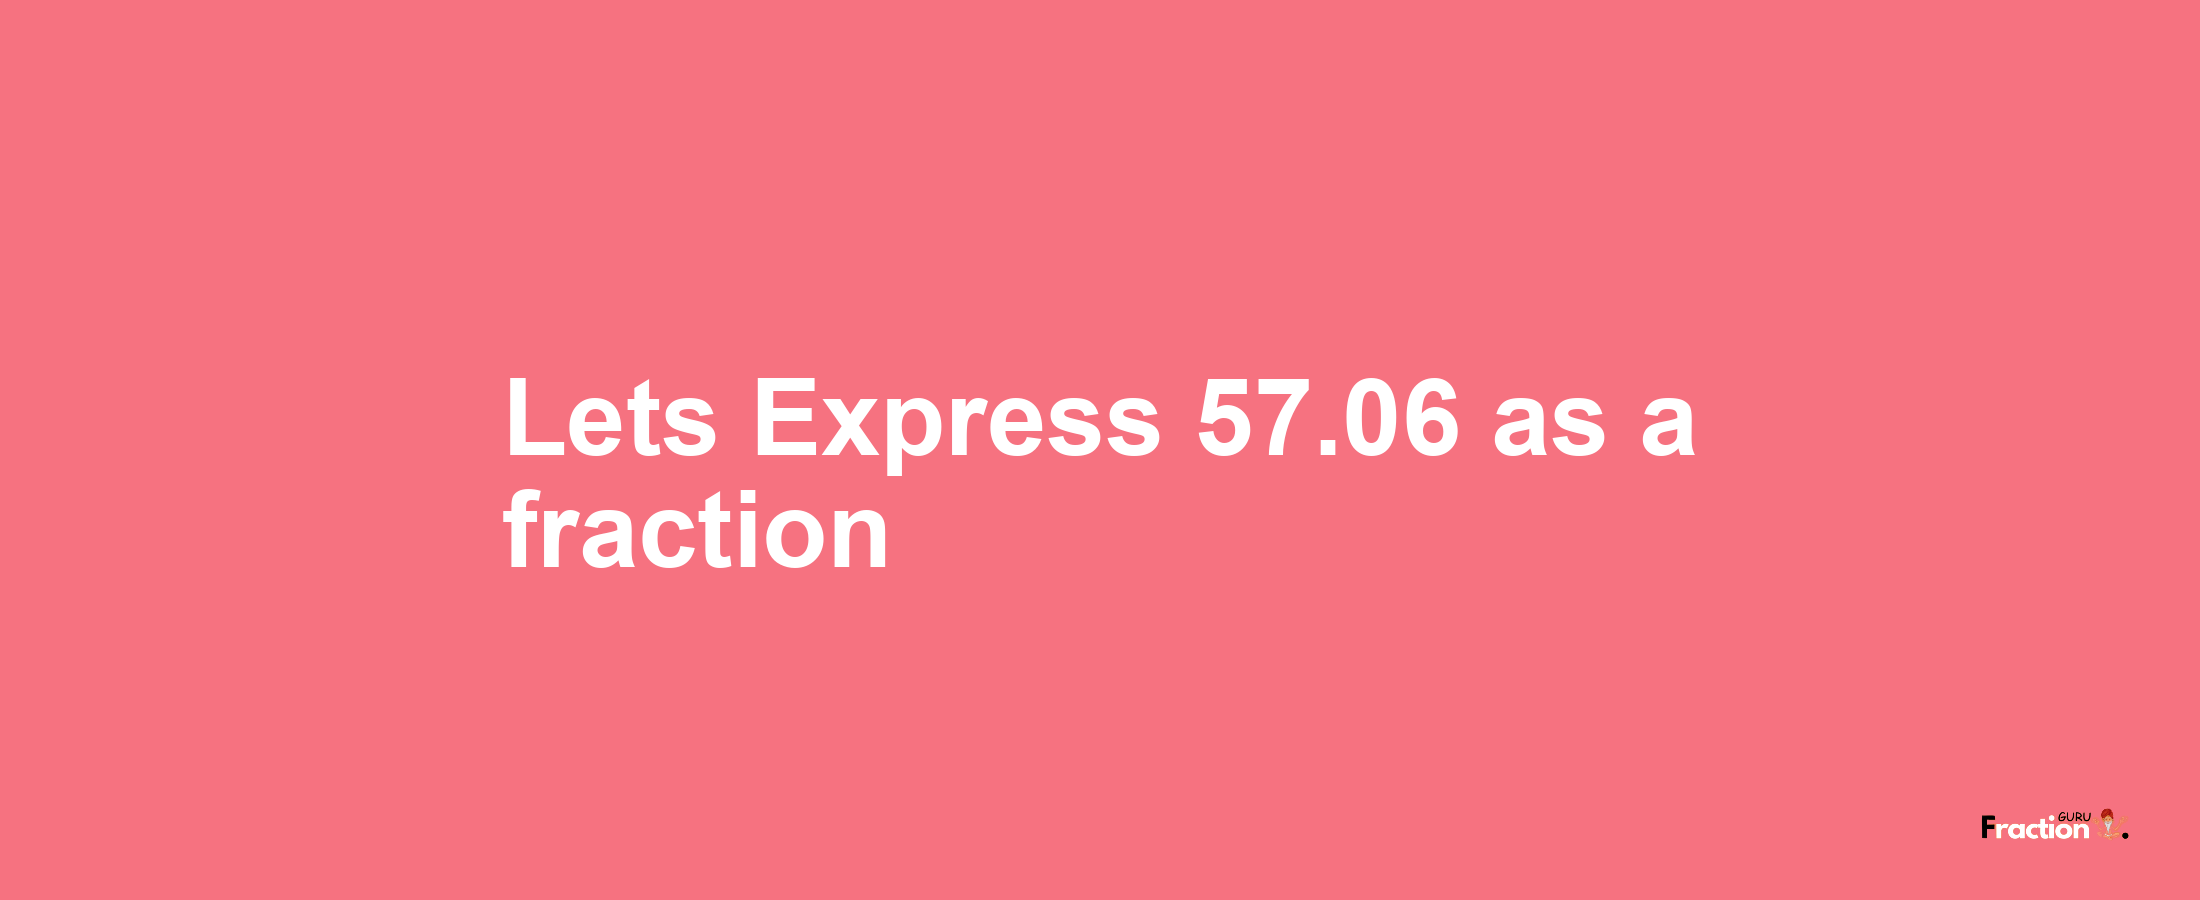 Lets Express 57.06 as afraction